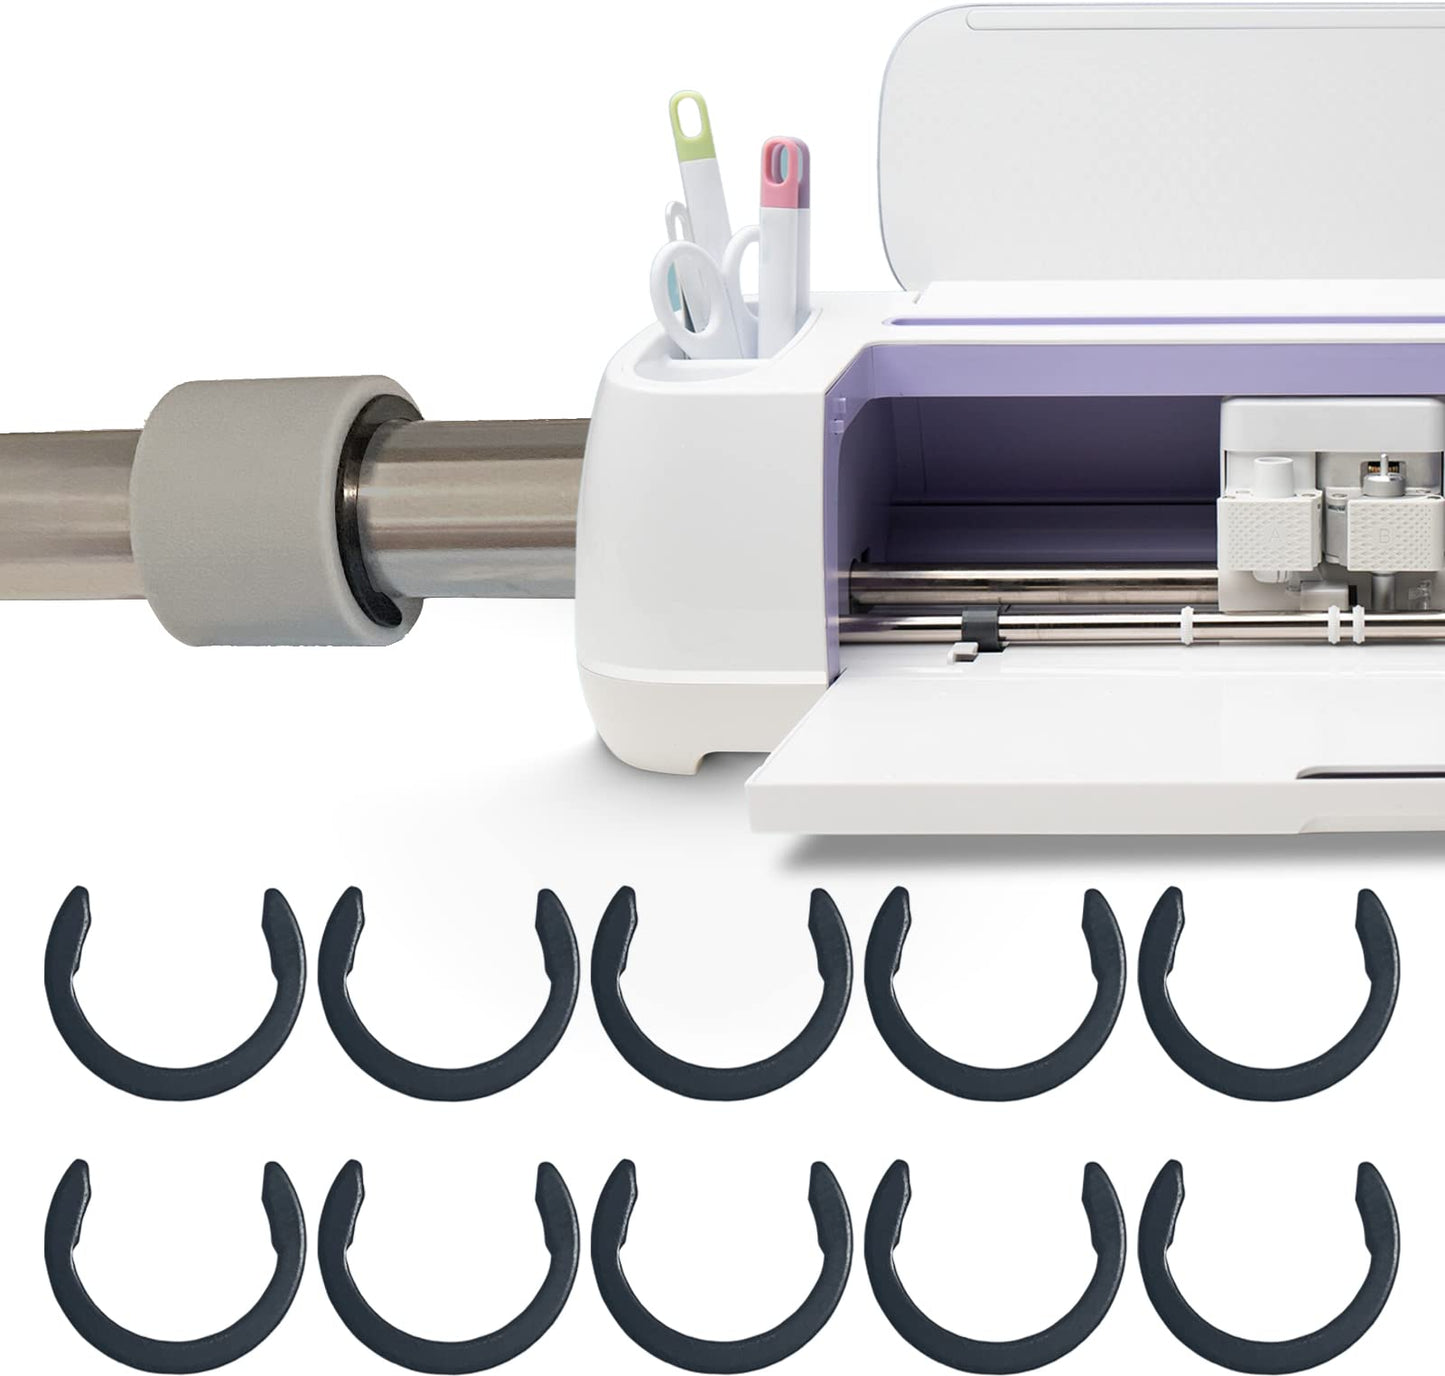 Rubber Roller Resolution Kit for Cricut Machine, Keep Rubber in Place with Retaining Rings - Compatible with Cricut Maker/Explore Air, Rubber Roller